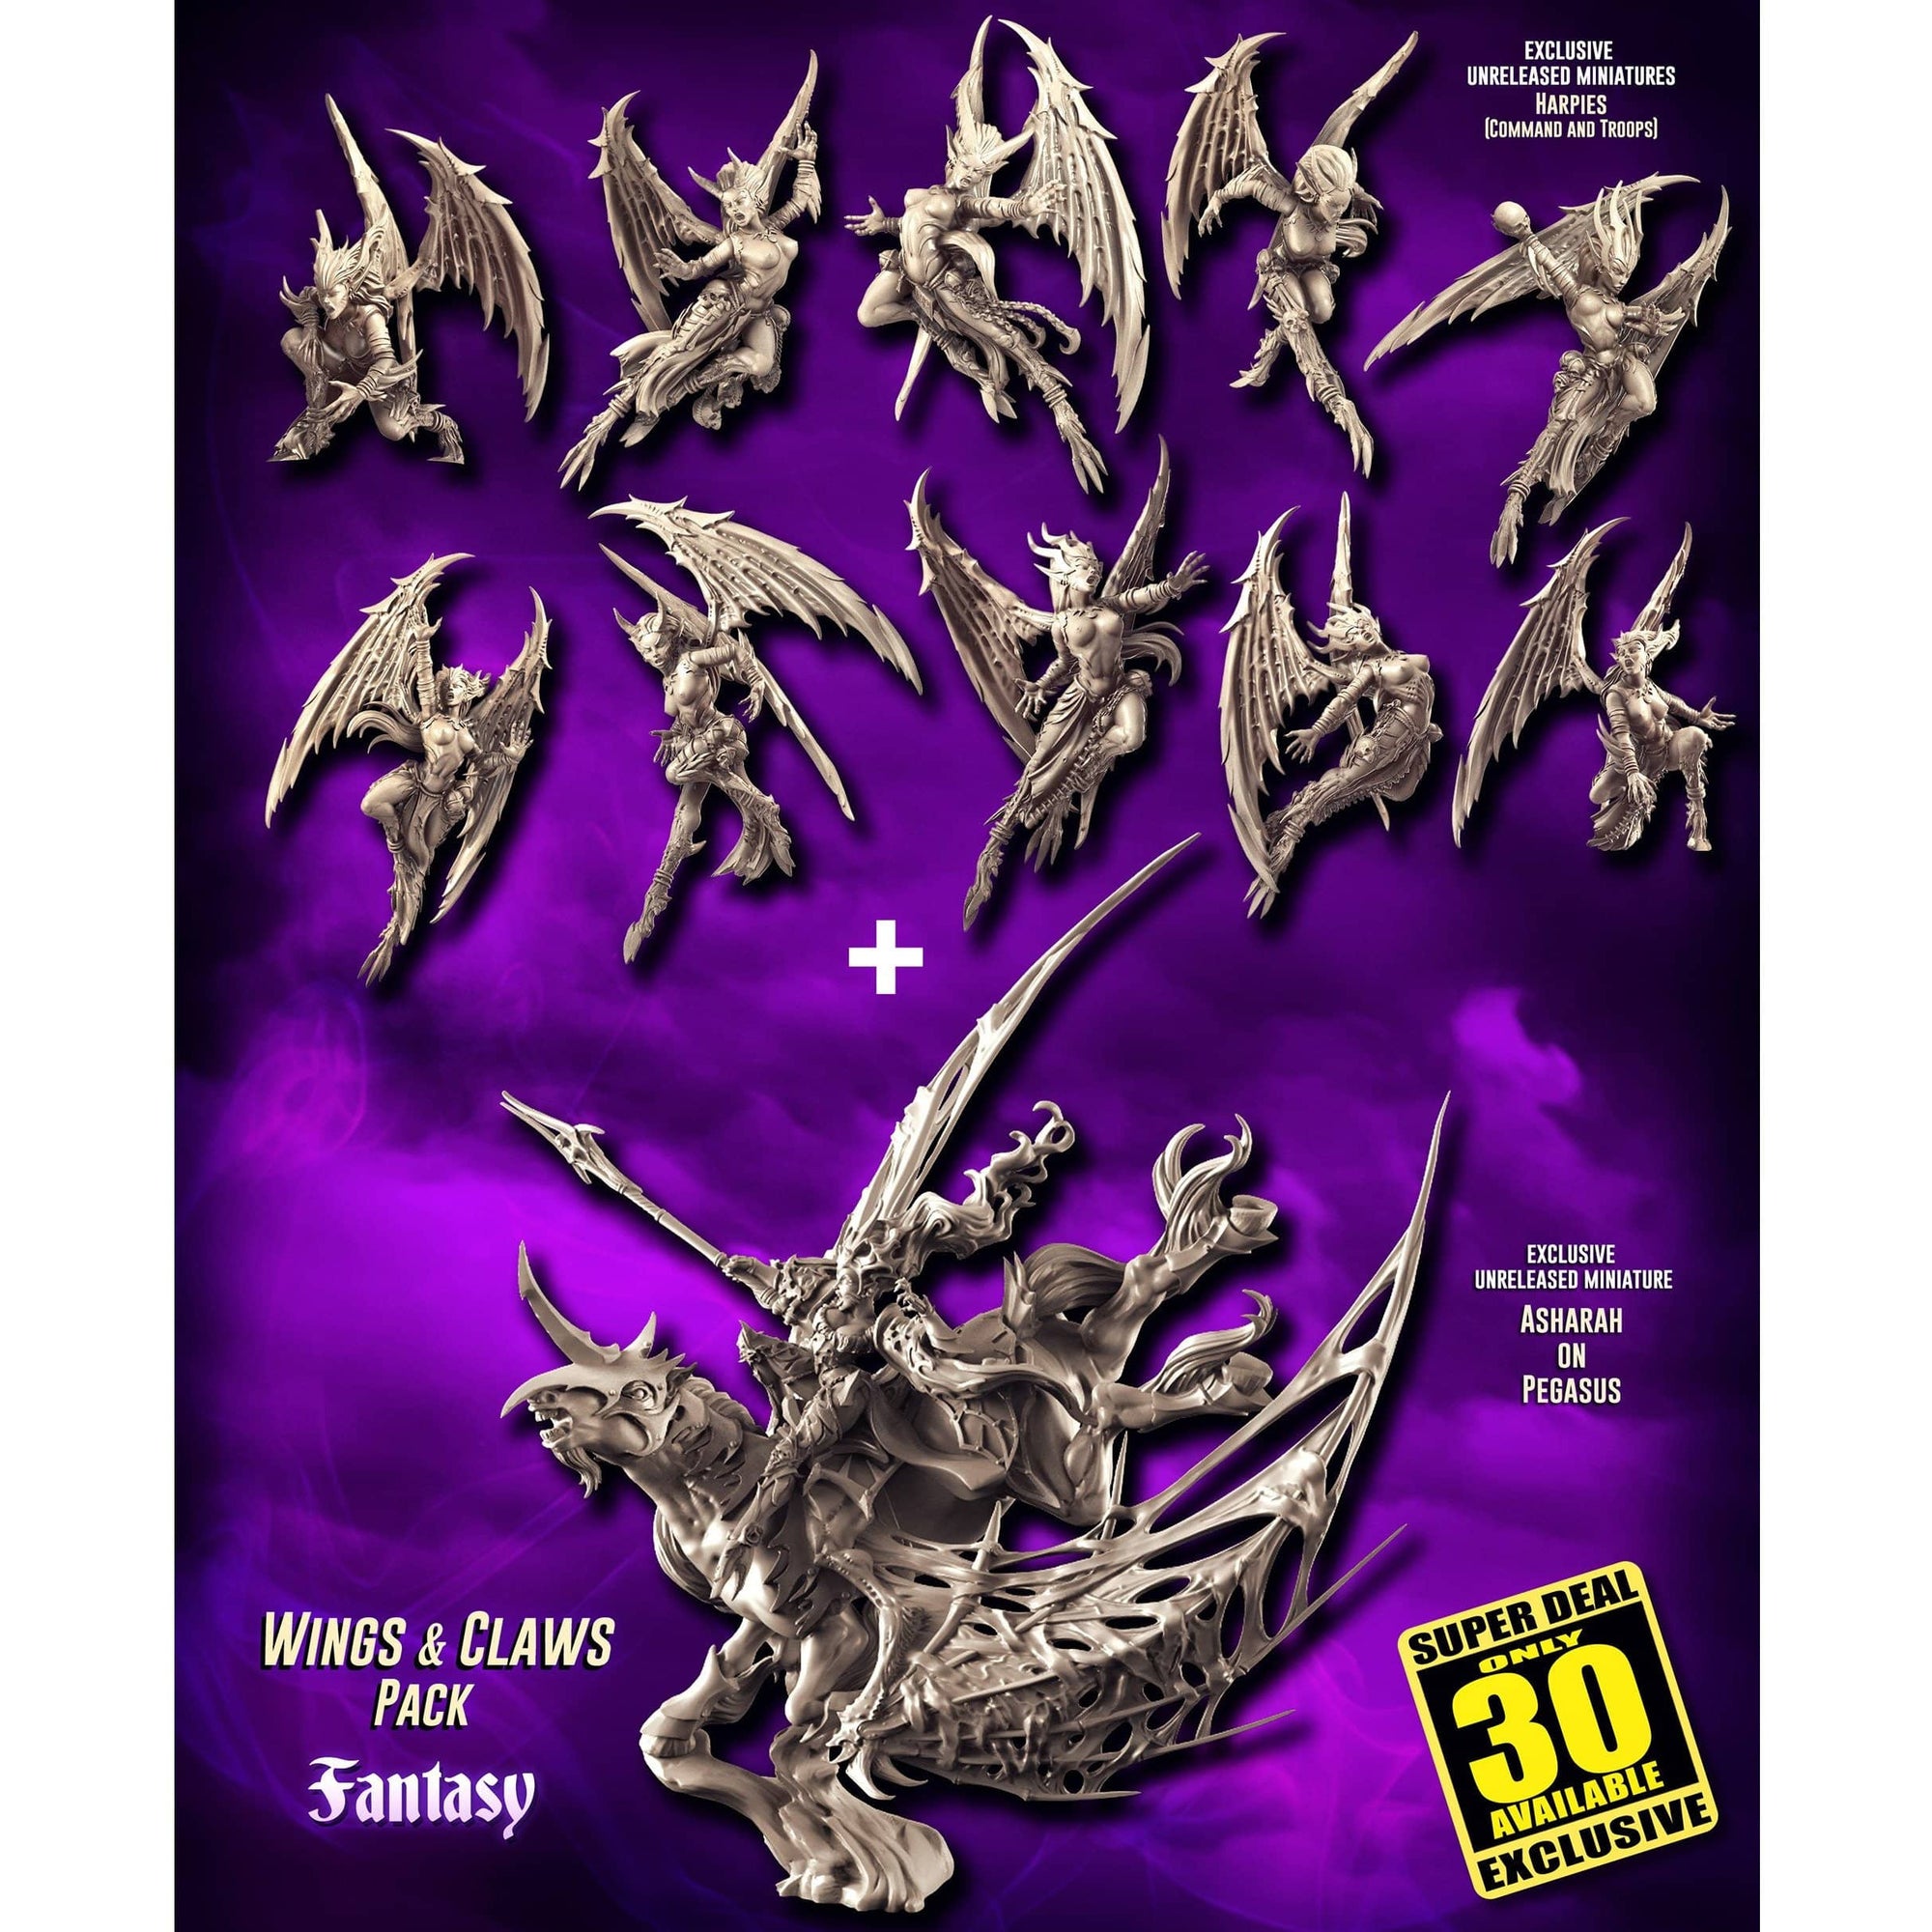 Exclusieve Wings & Claws Pack (DE - Fantasy)